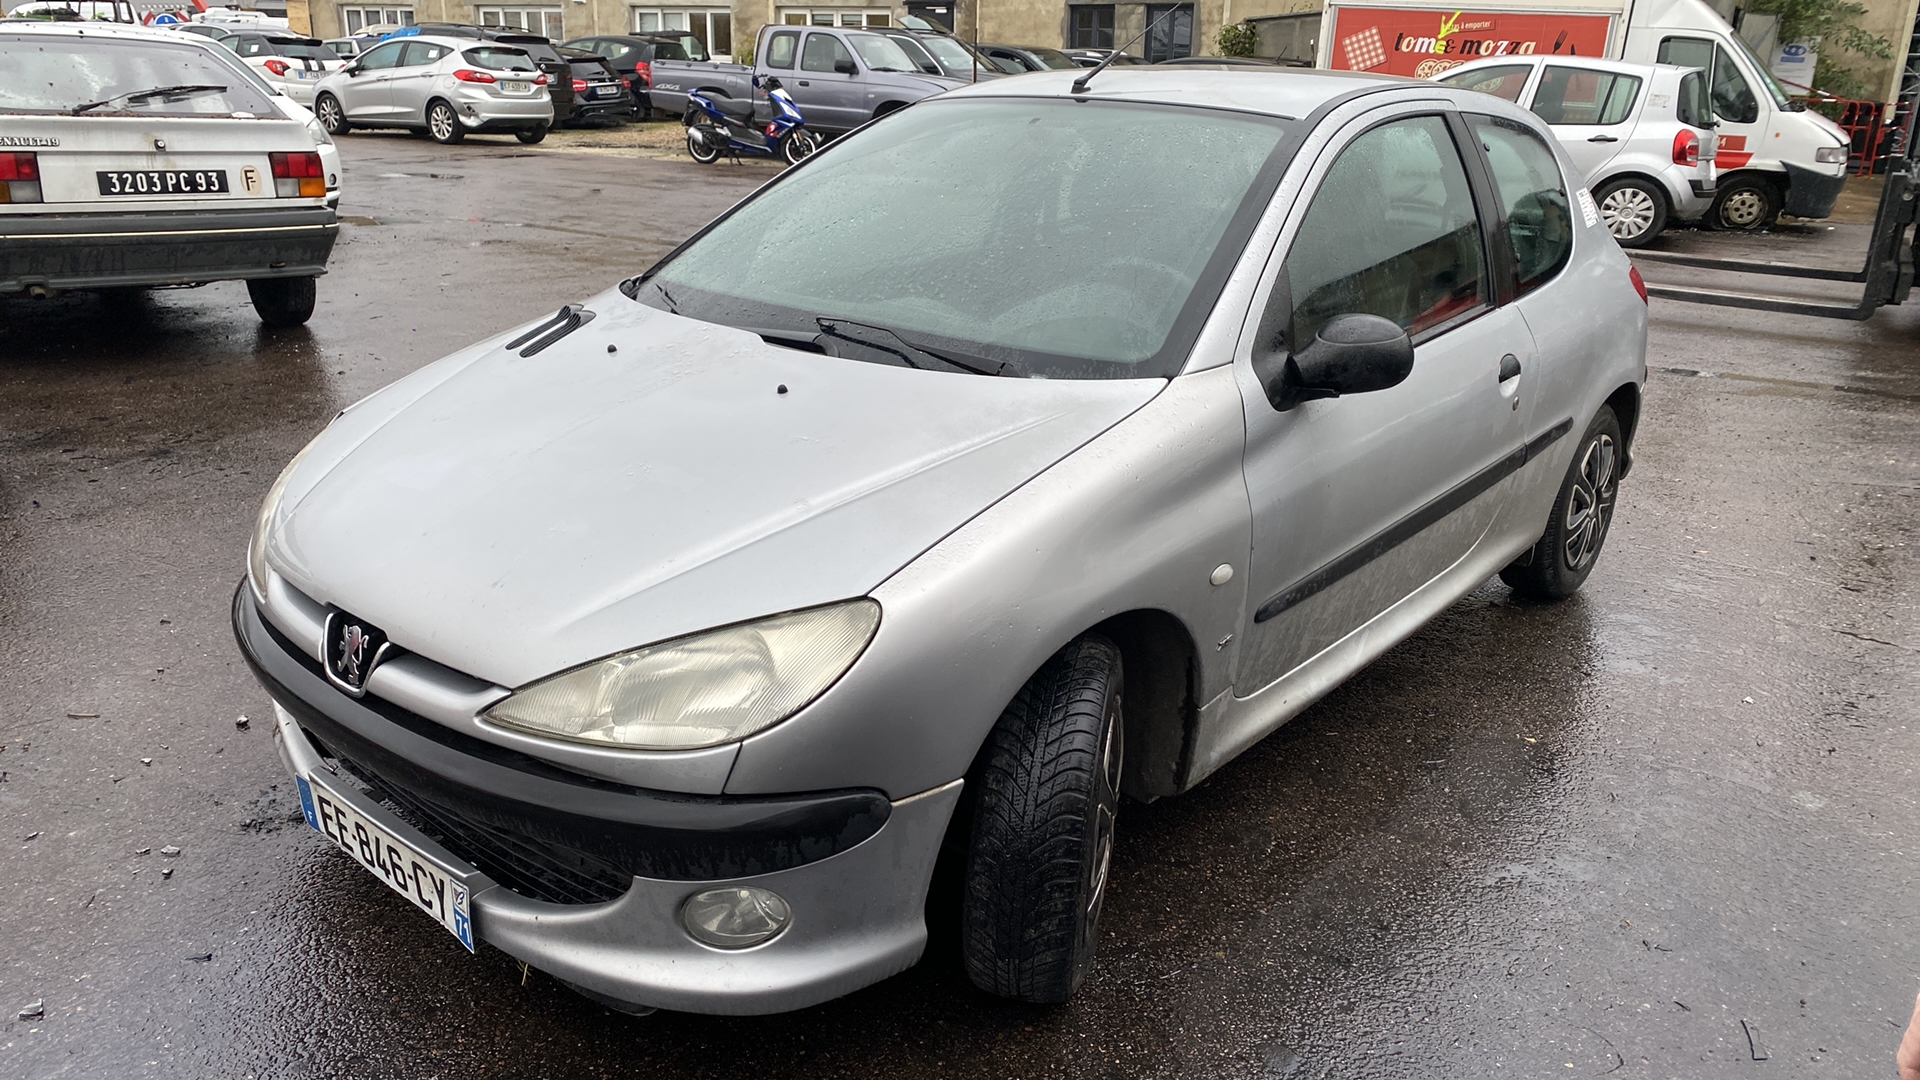 Bras essuie glace arriere PEUGEOT 206 PHASE 1 BREAK occasion